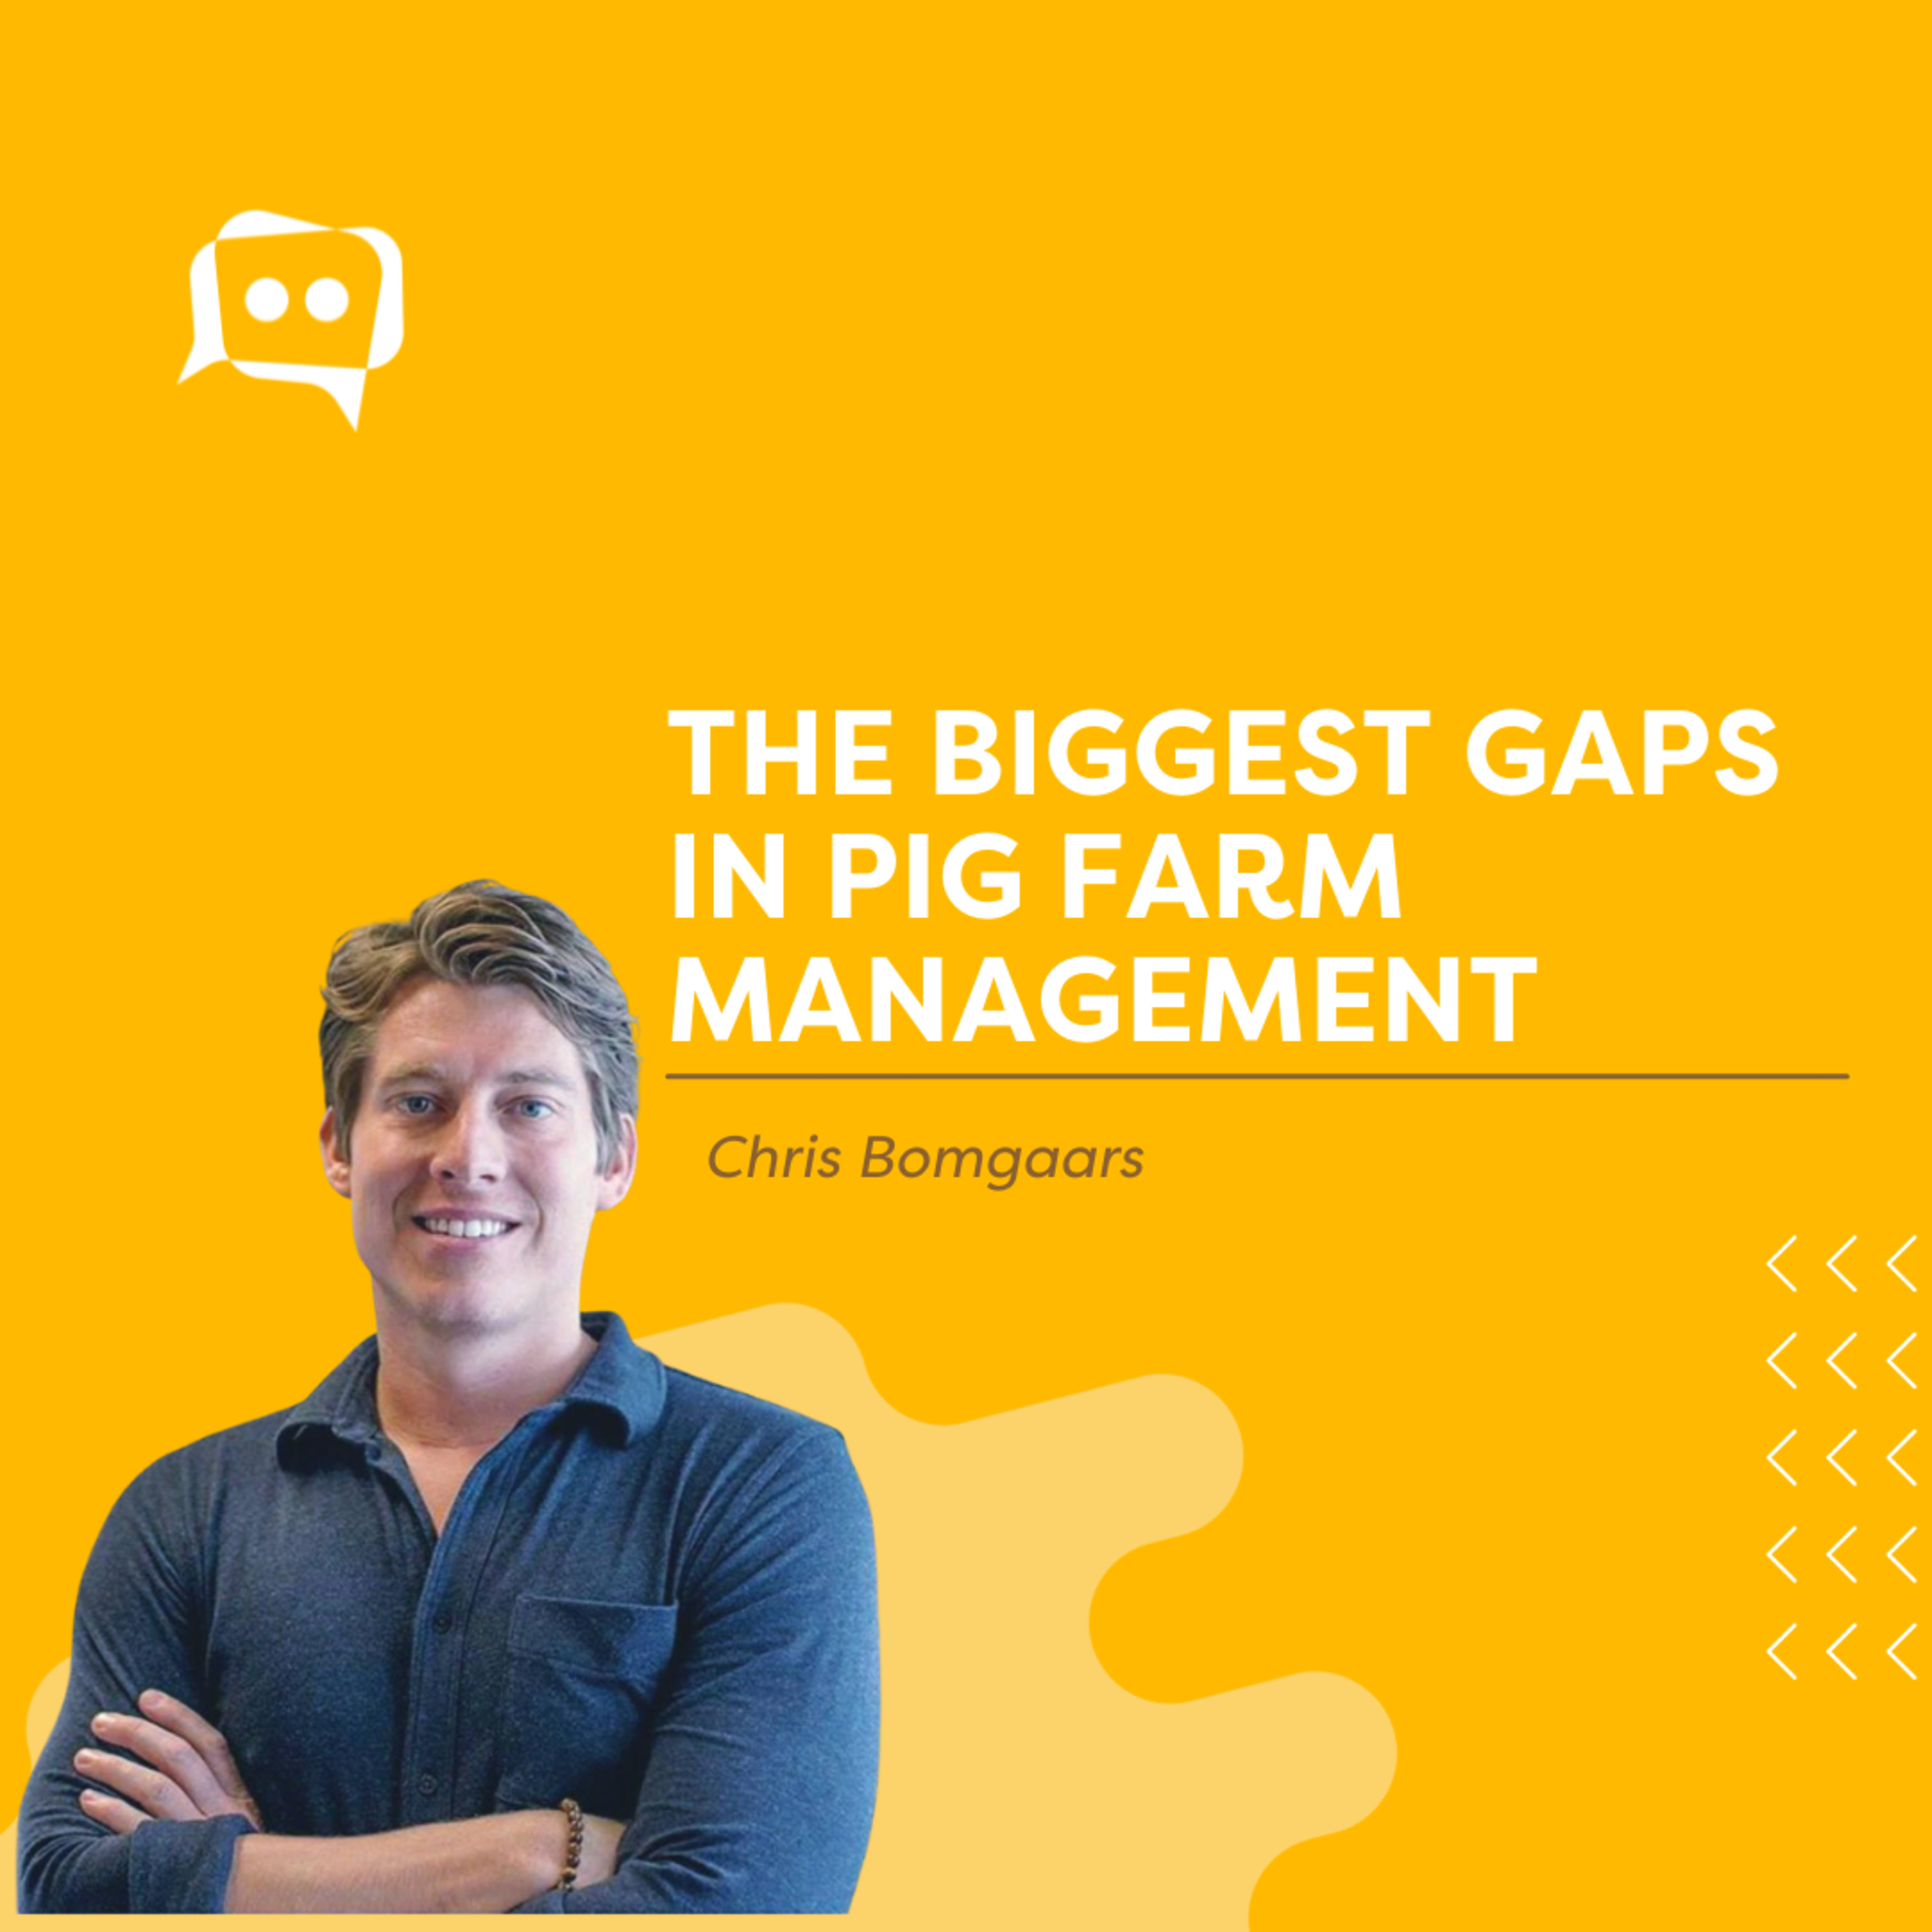 #SHORTS: The biggest gaps in pig farm management, with Chris Bomgaars